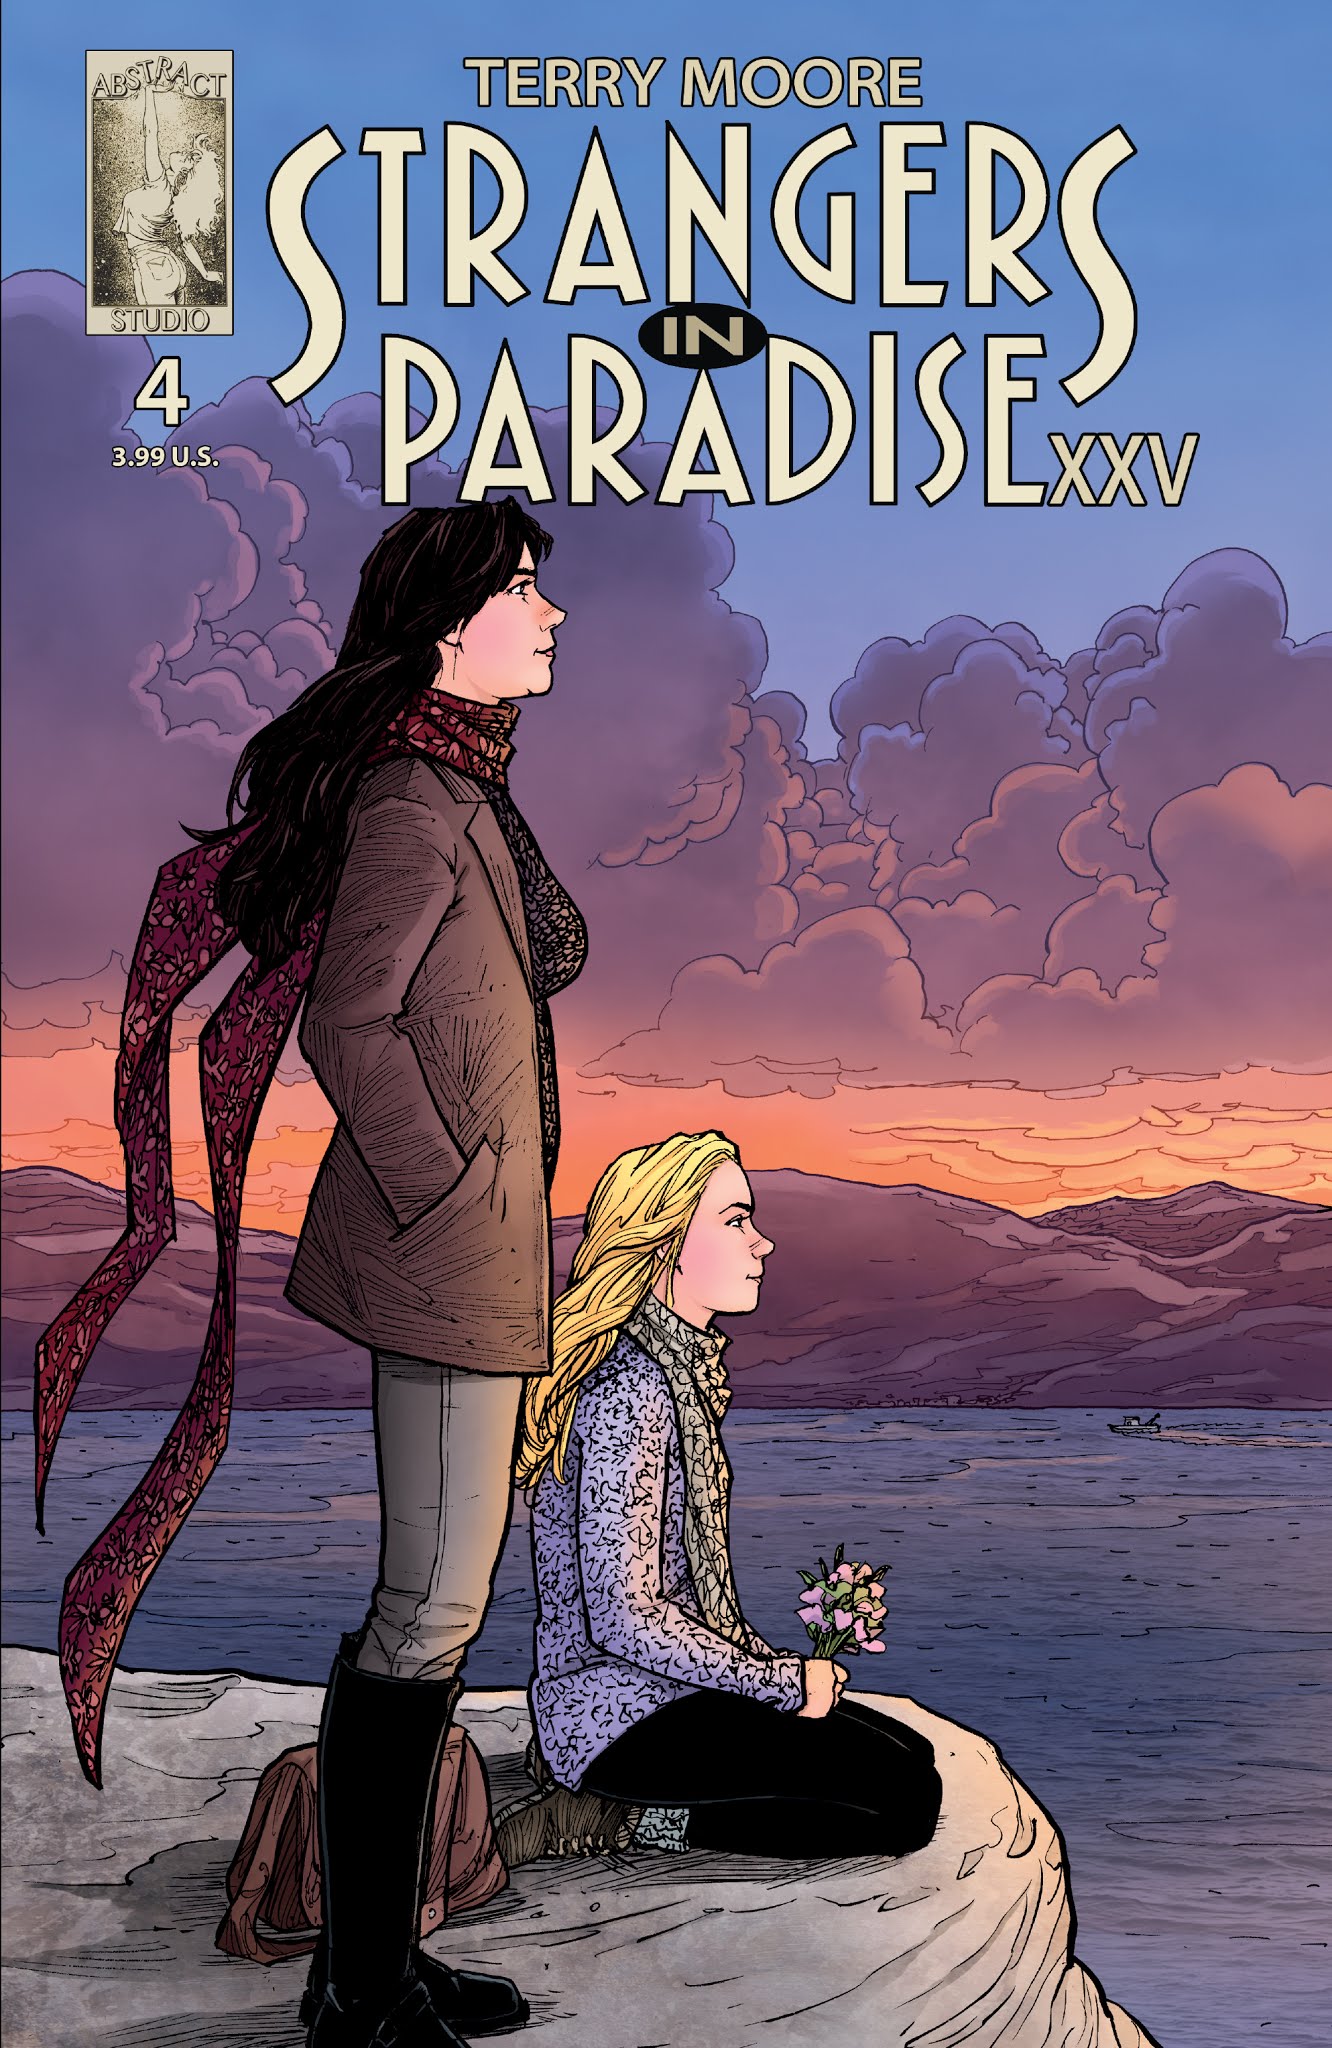 Read online Strangers in Paradise XXV comic -  Issue #4 - 1